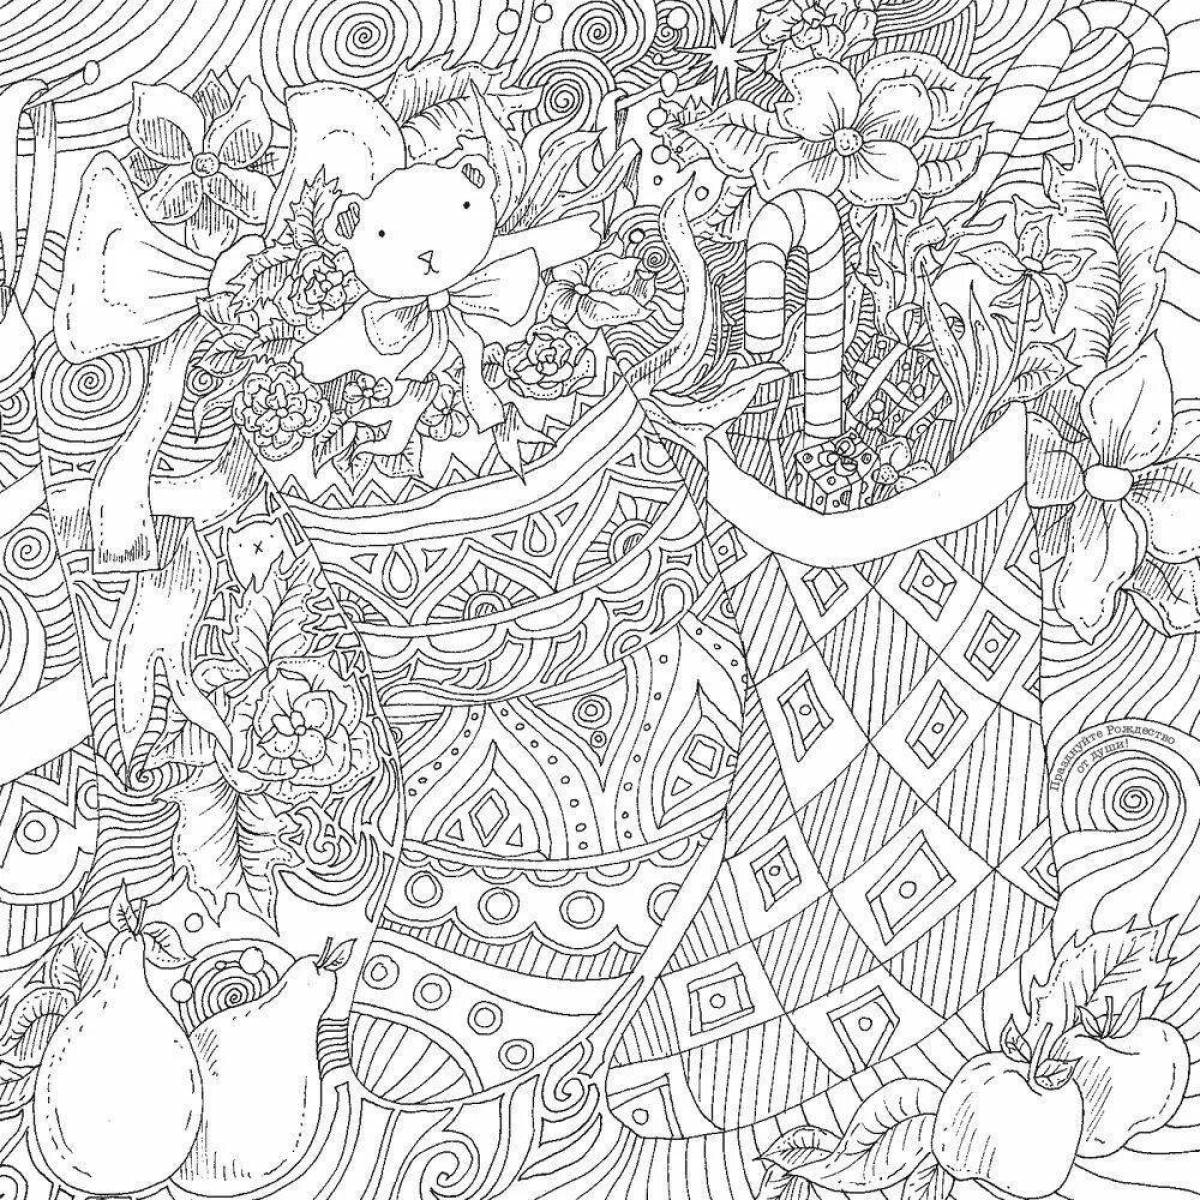 Inspirational Christmas coloring book for adults